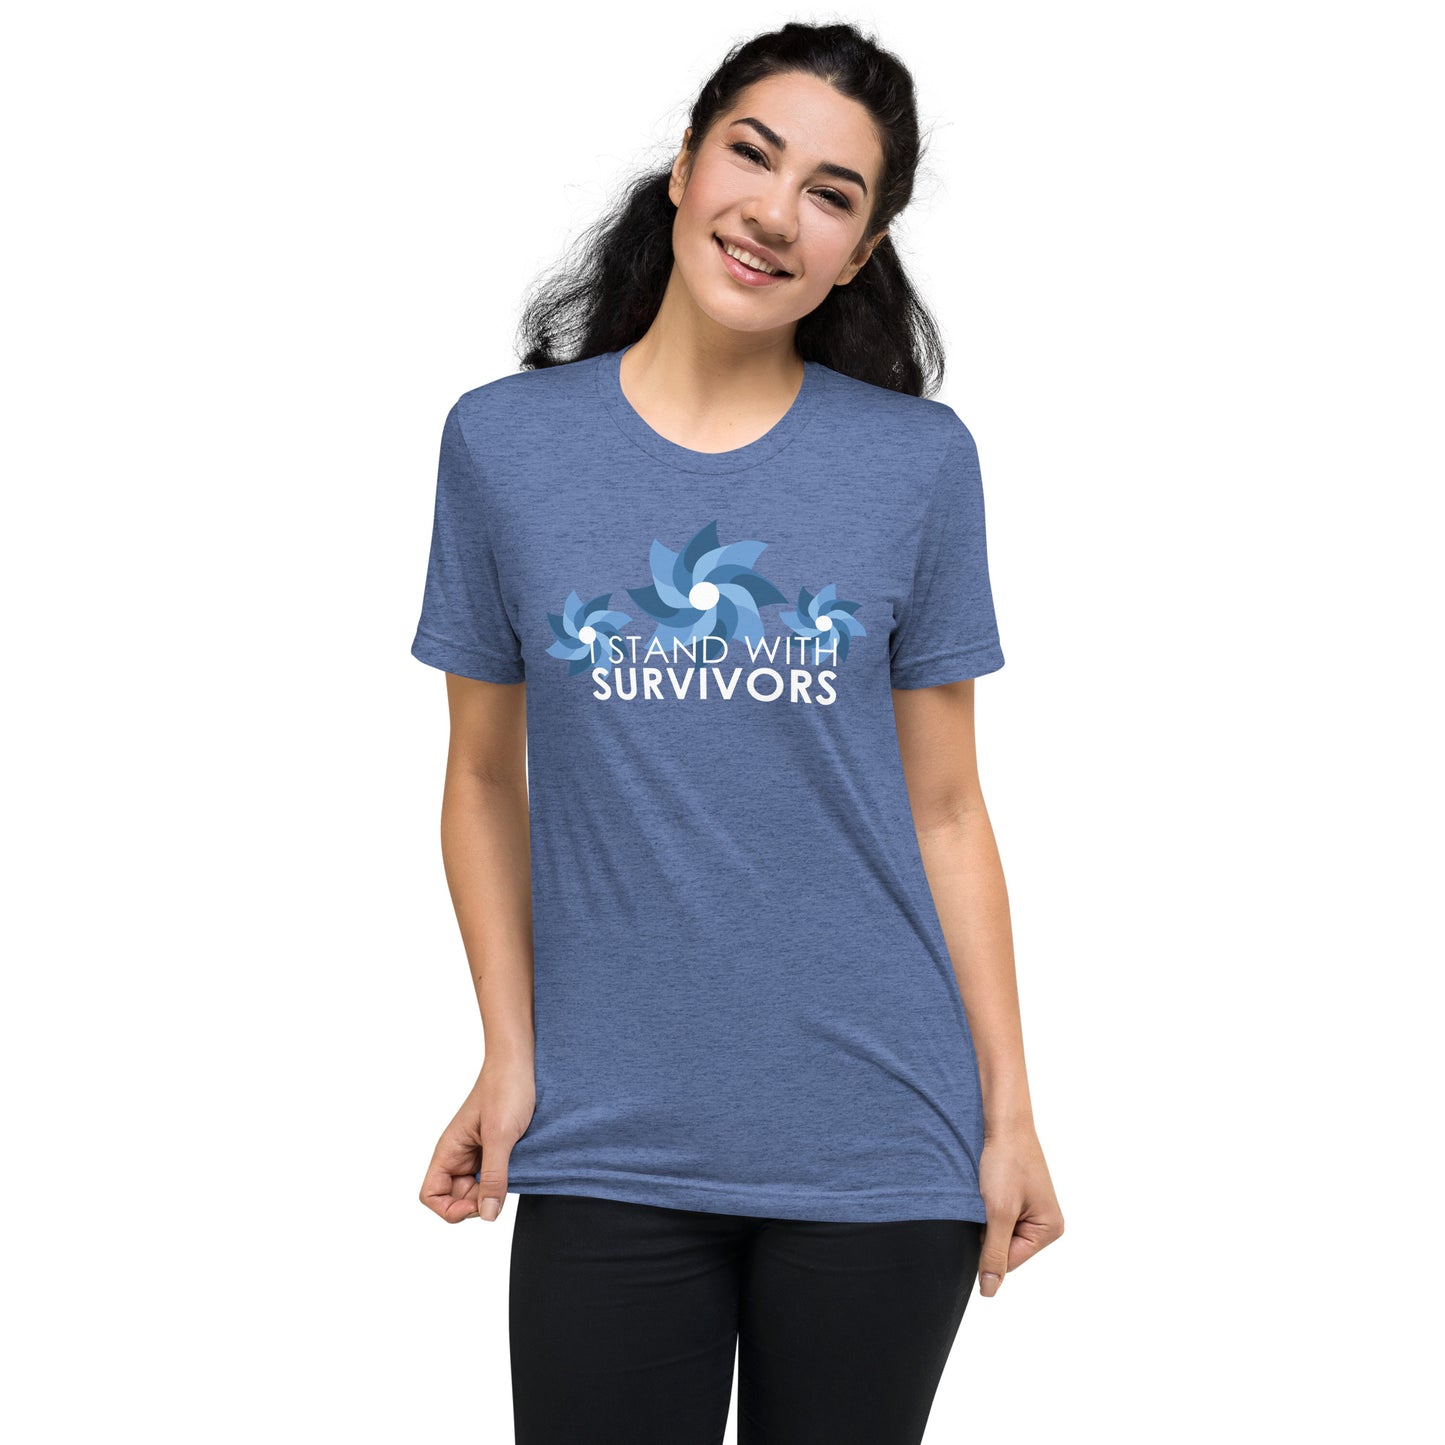 I Stand With Survivors Tri-Blend Tee